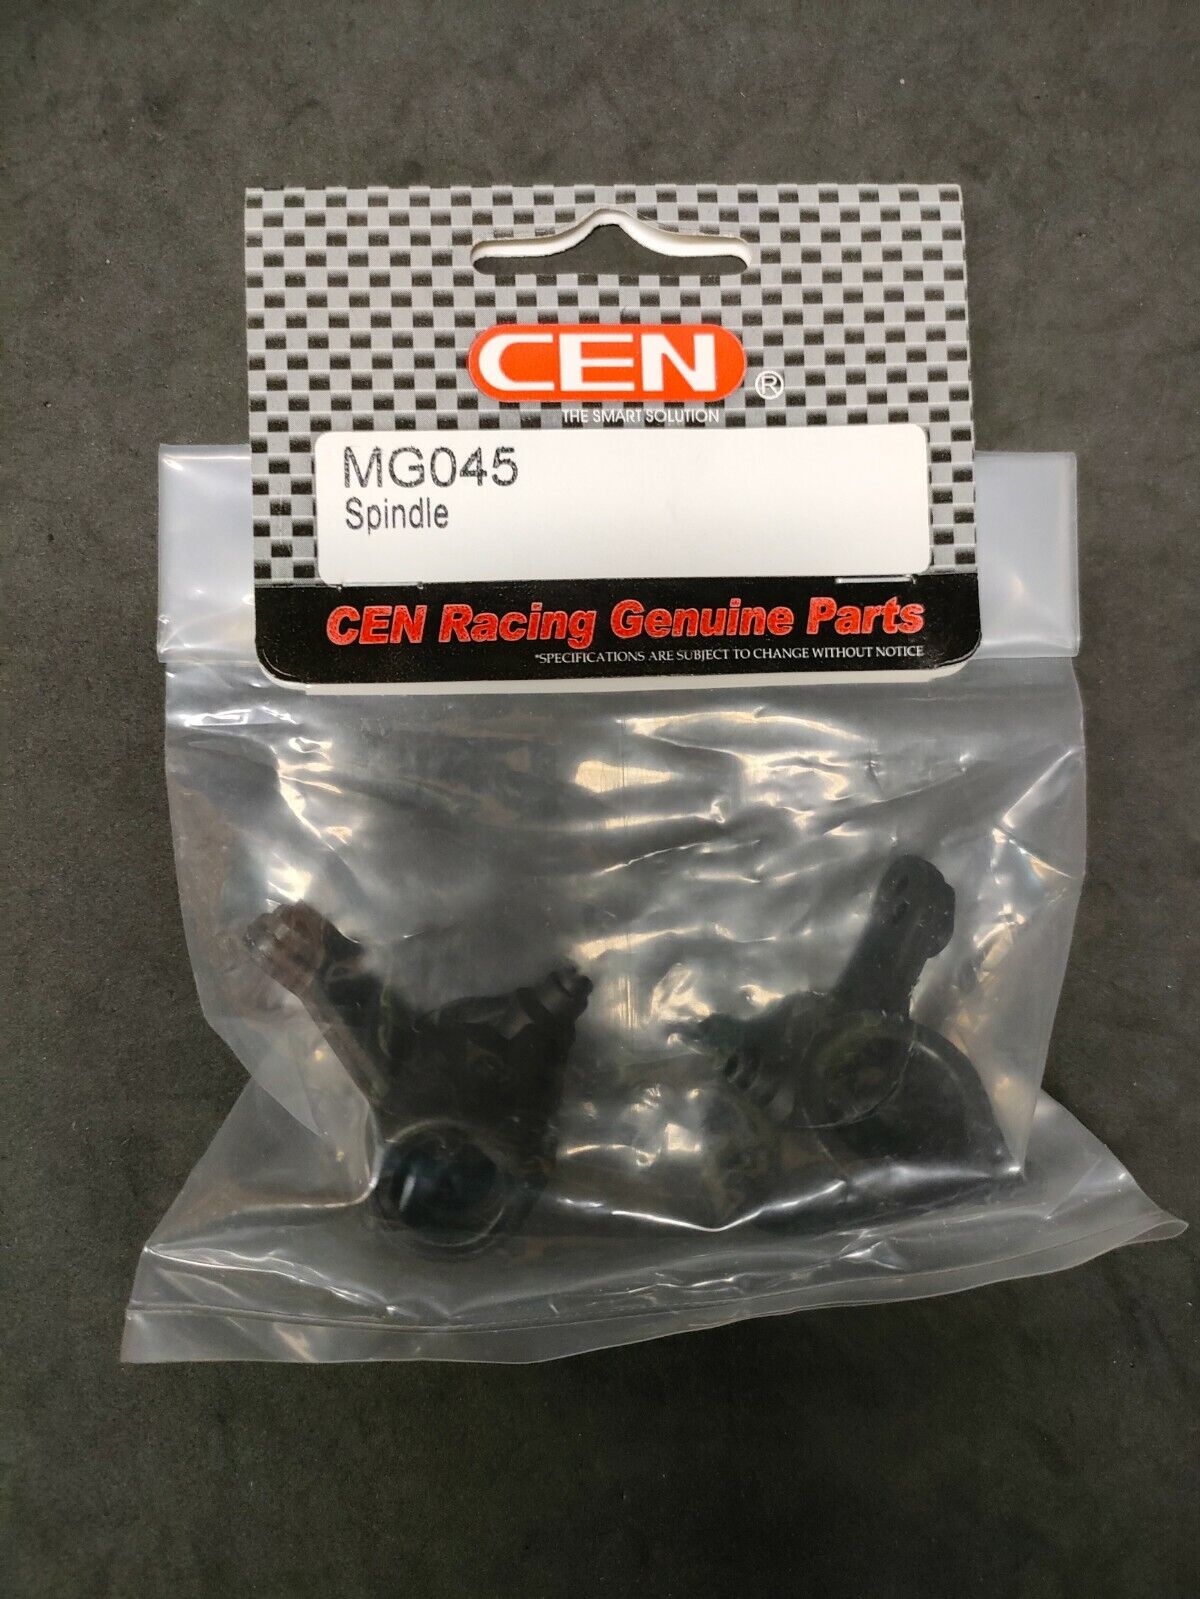 CEN Racing parts MG045 "Spindle" RARE! Best Price!